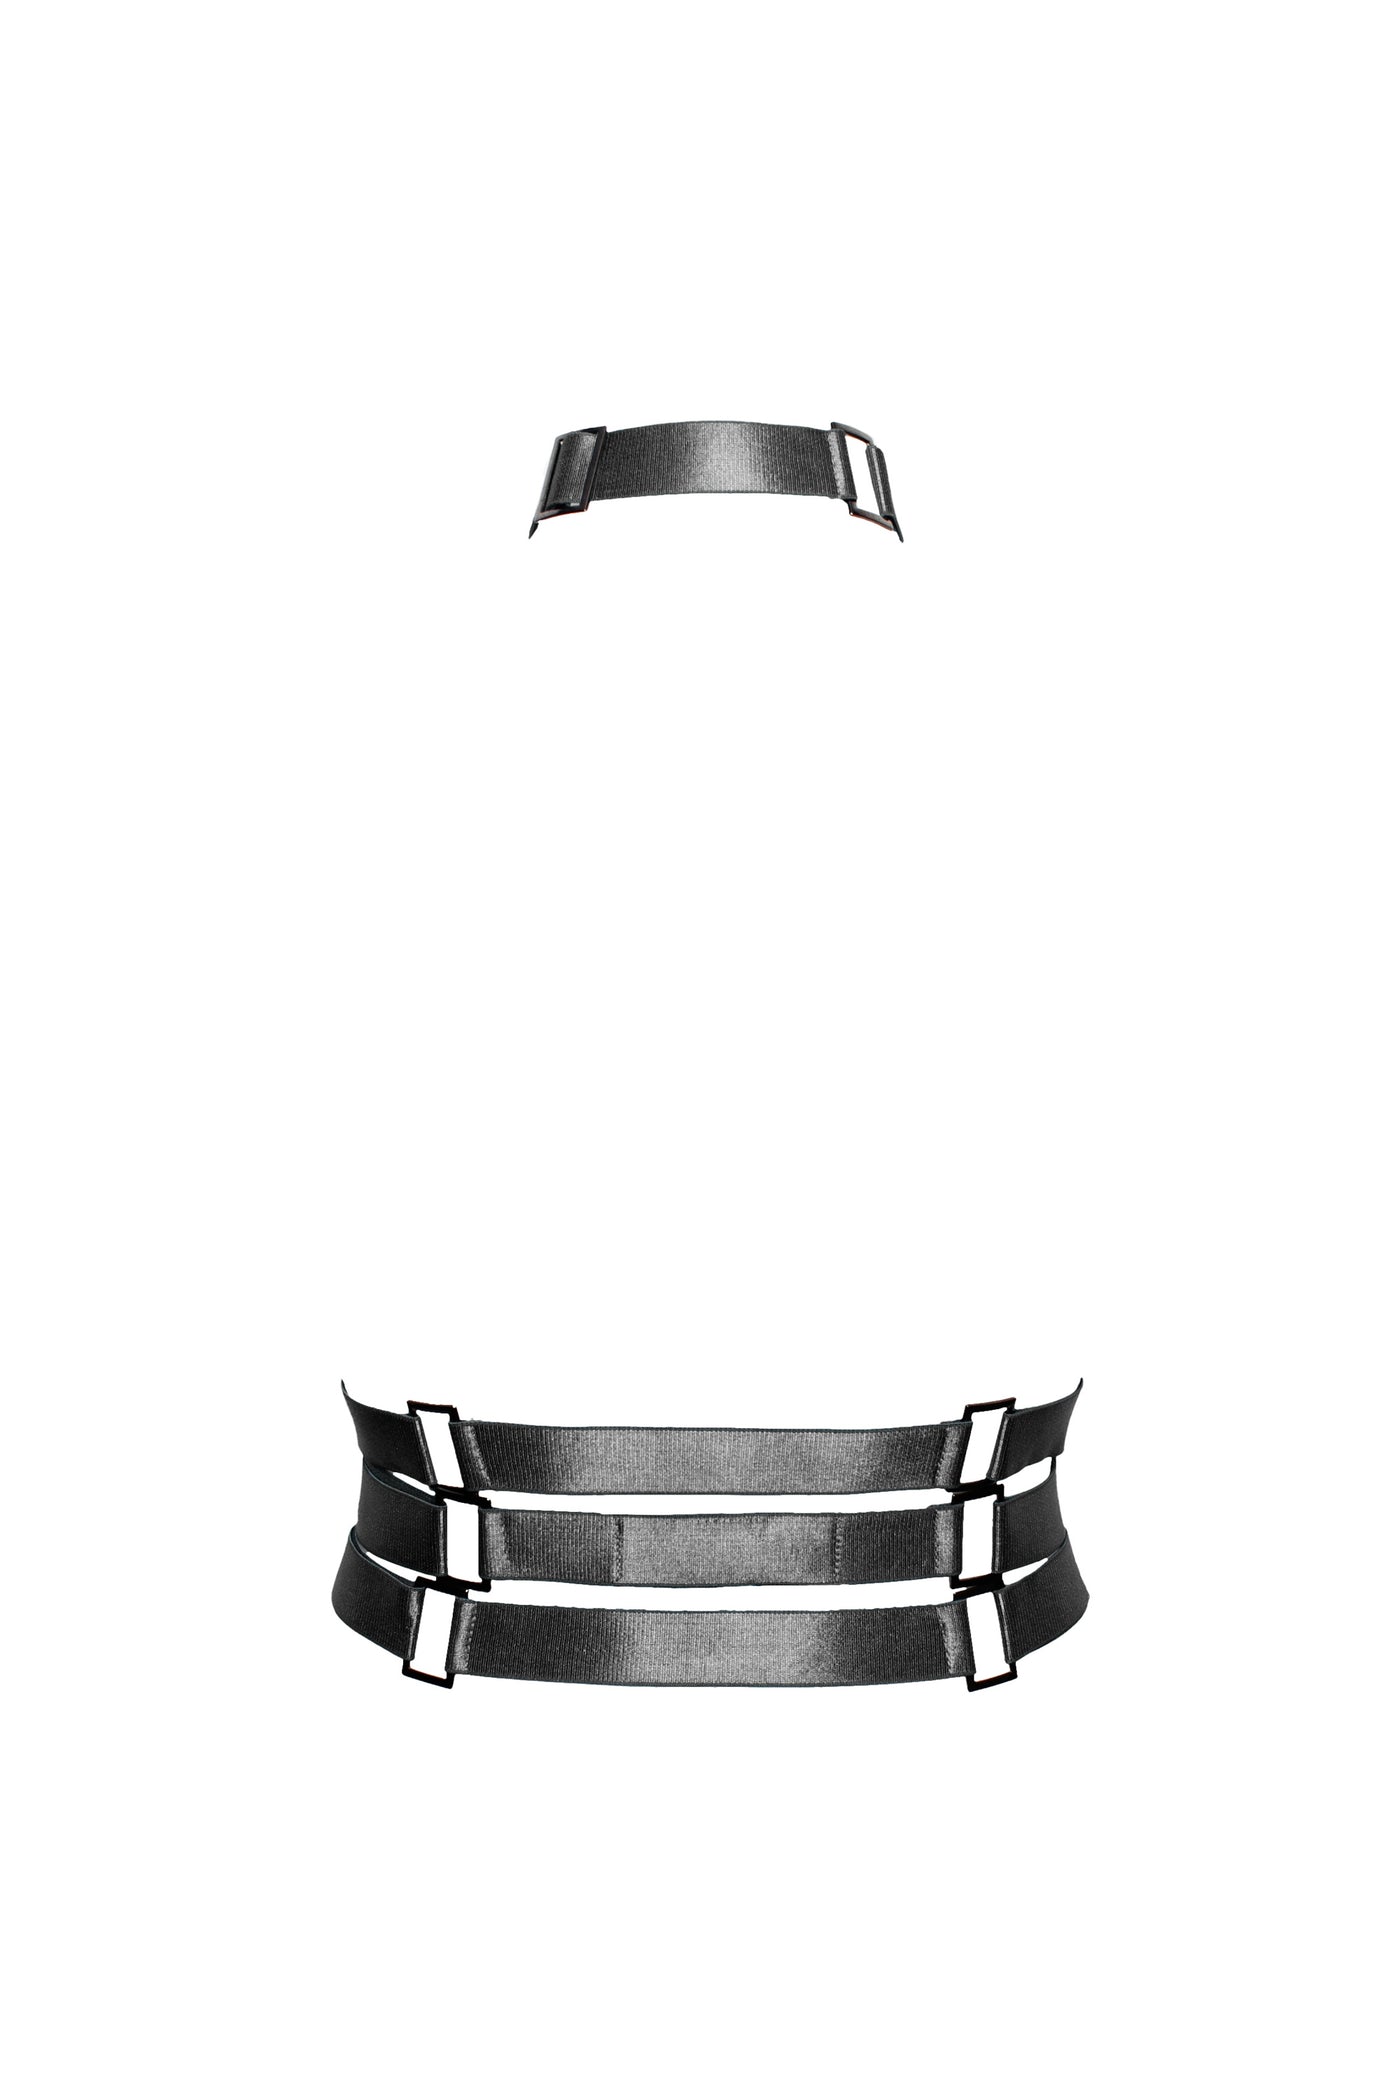 Siren Caged Bust Harness (Black)